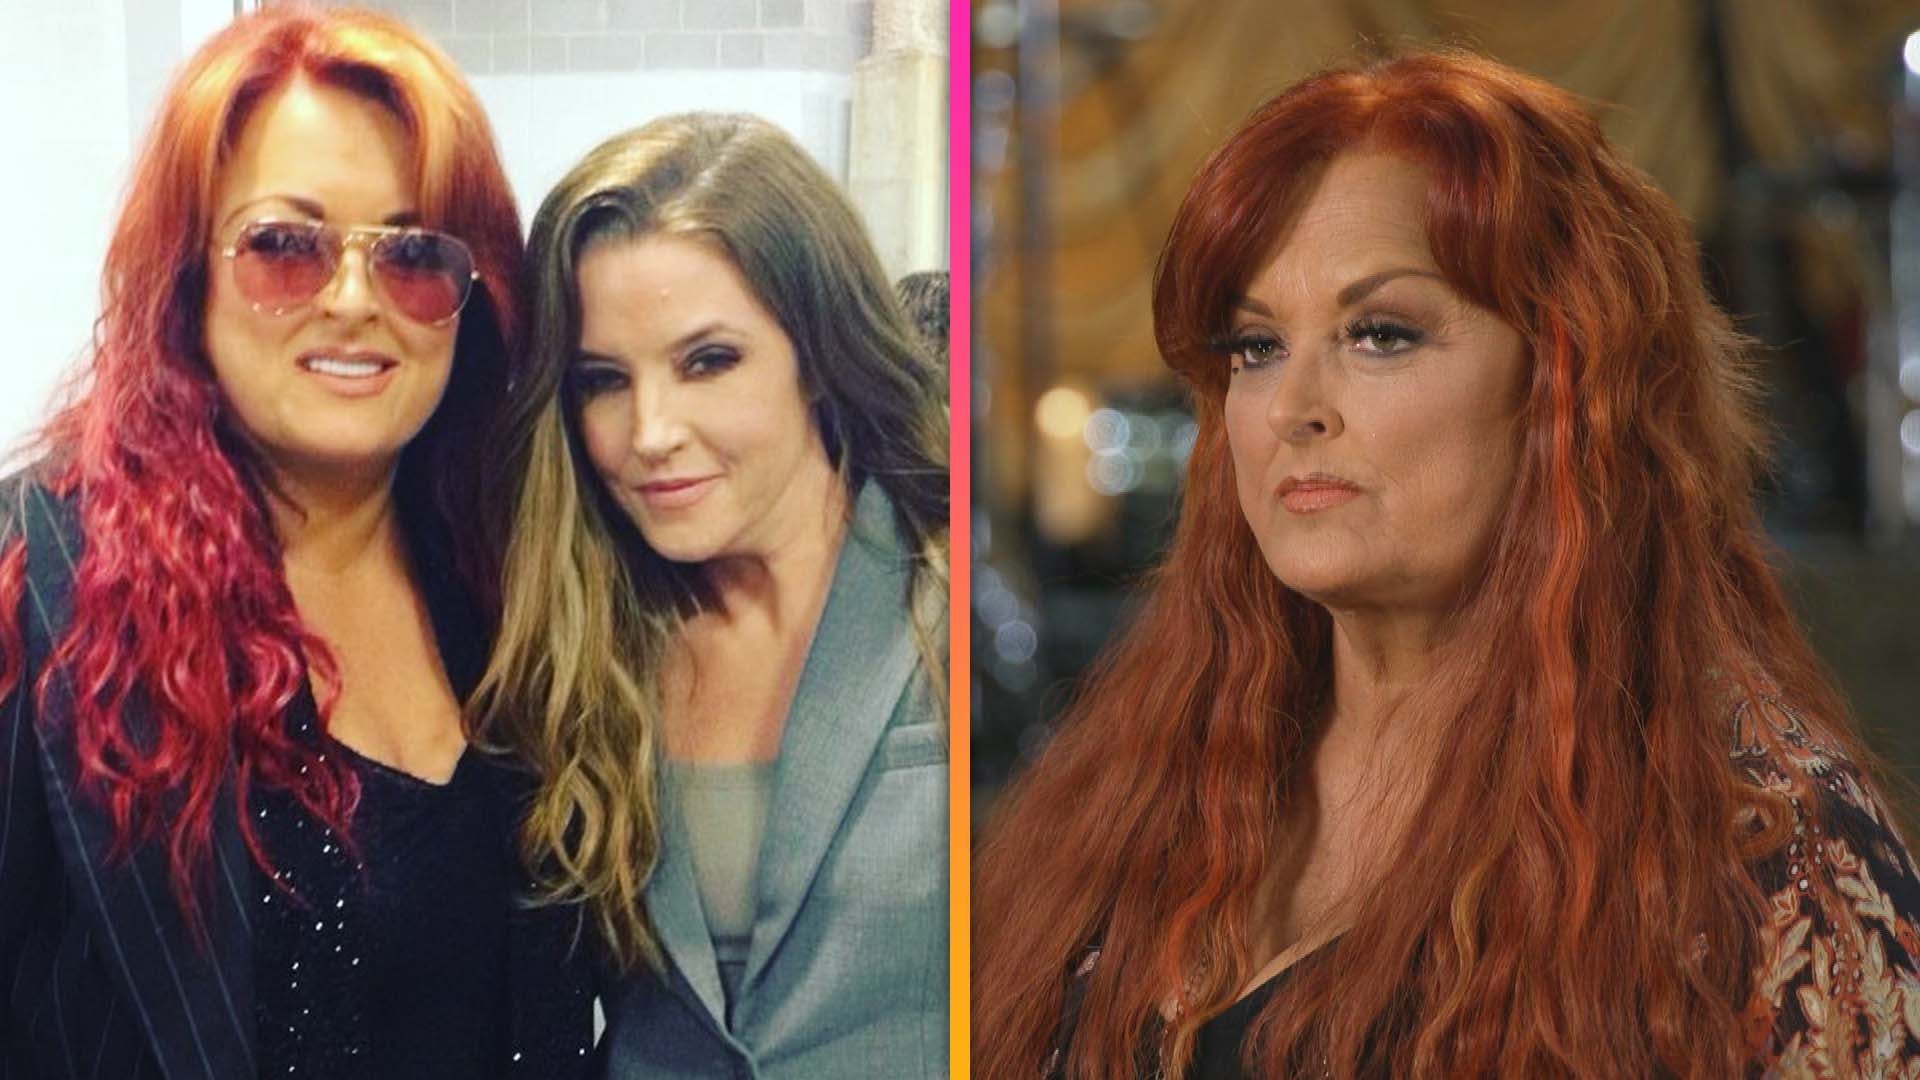 Wynonna Judd Reflects on Lisa Marie Presley's Death and Opens Up About Her Own Grief (Exclusive)